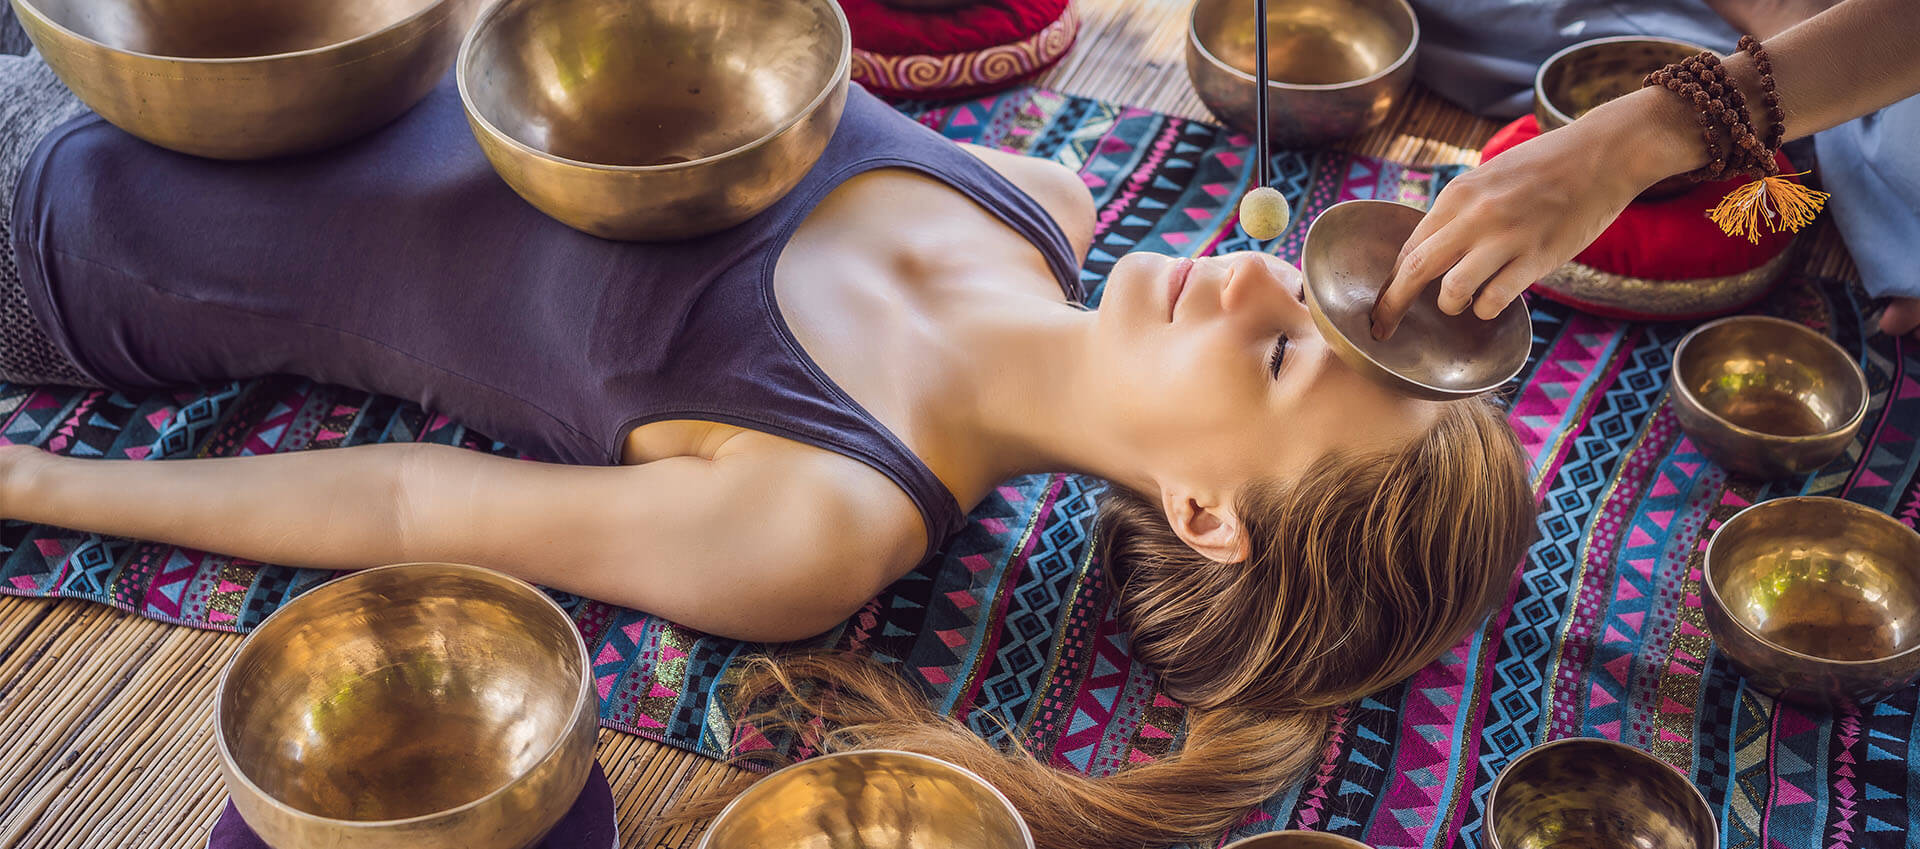 Woman lying on her back with sound bowls on and around her body